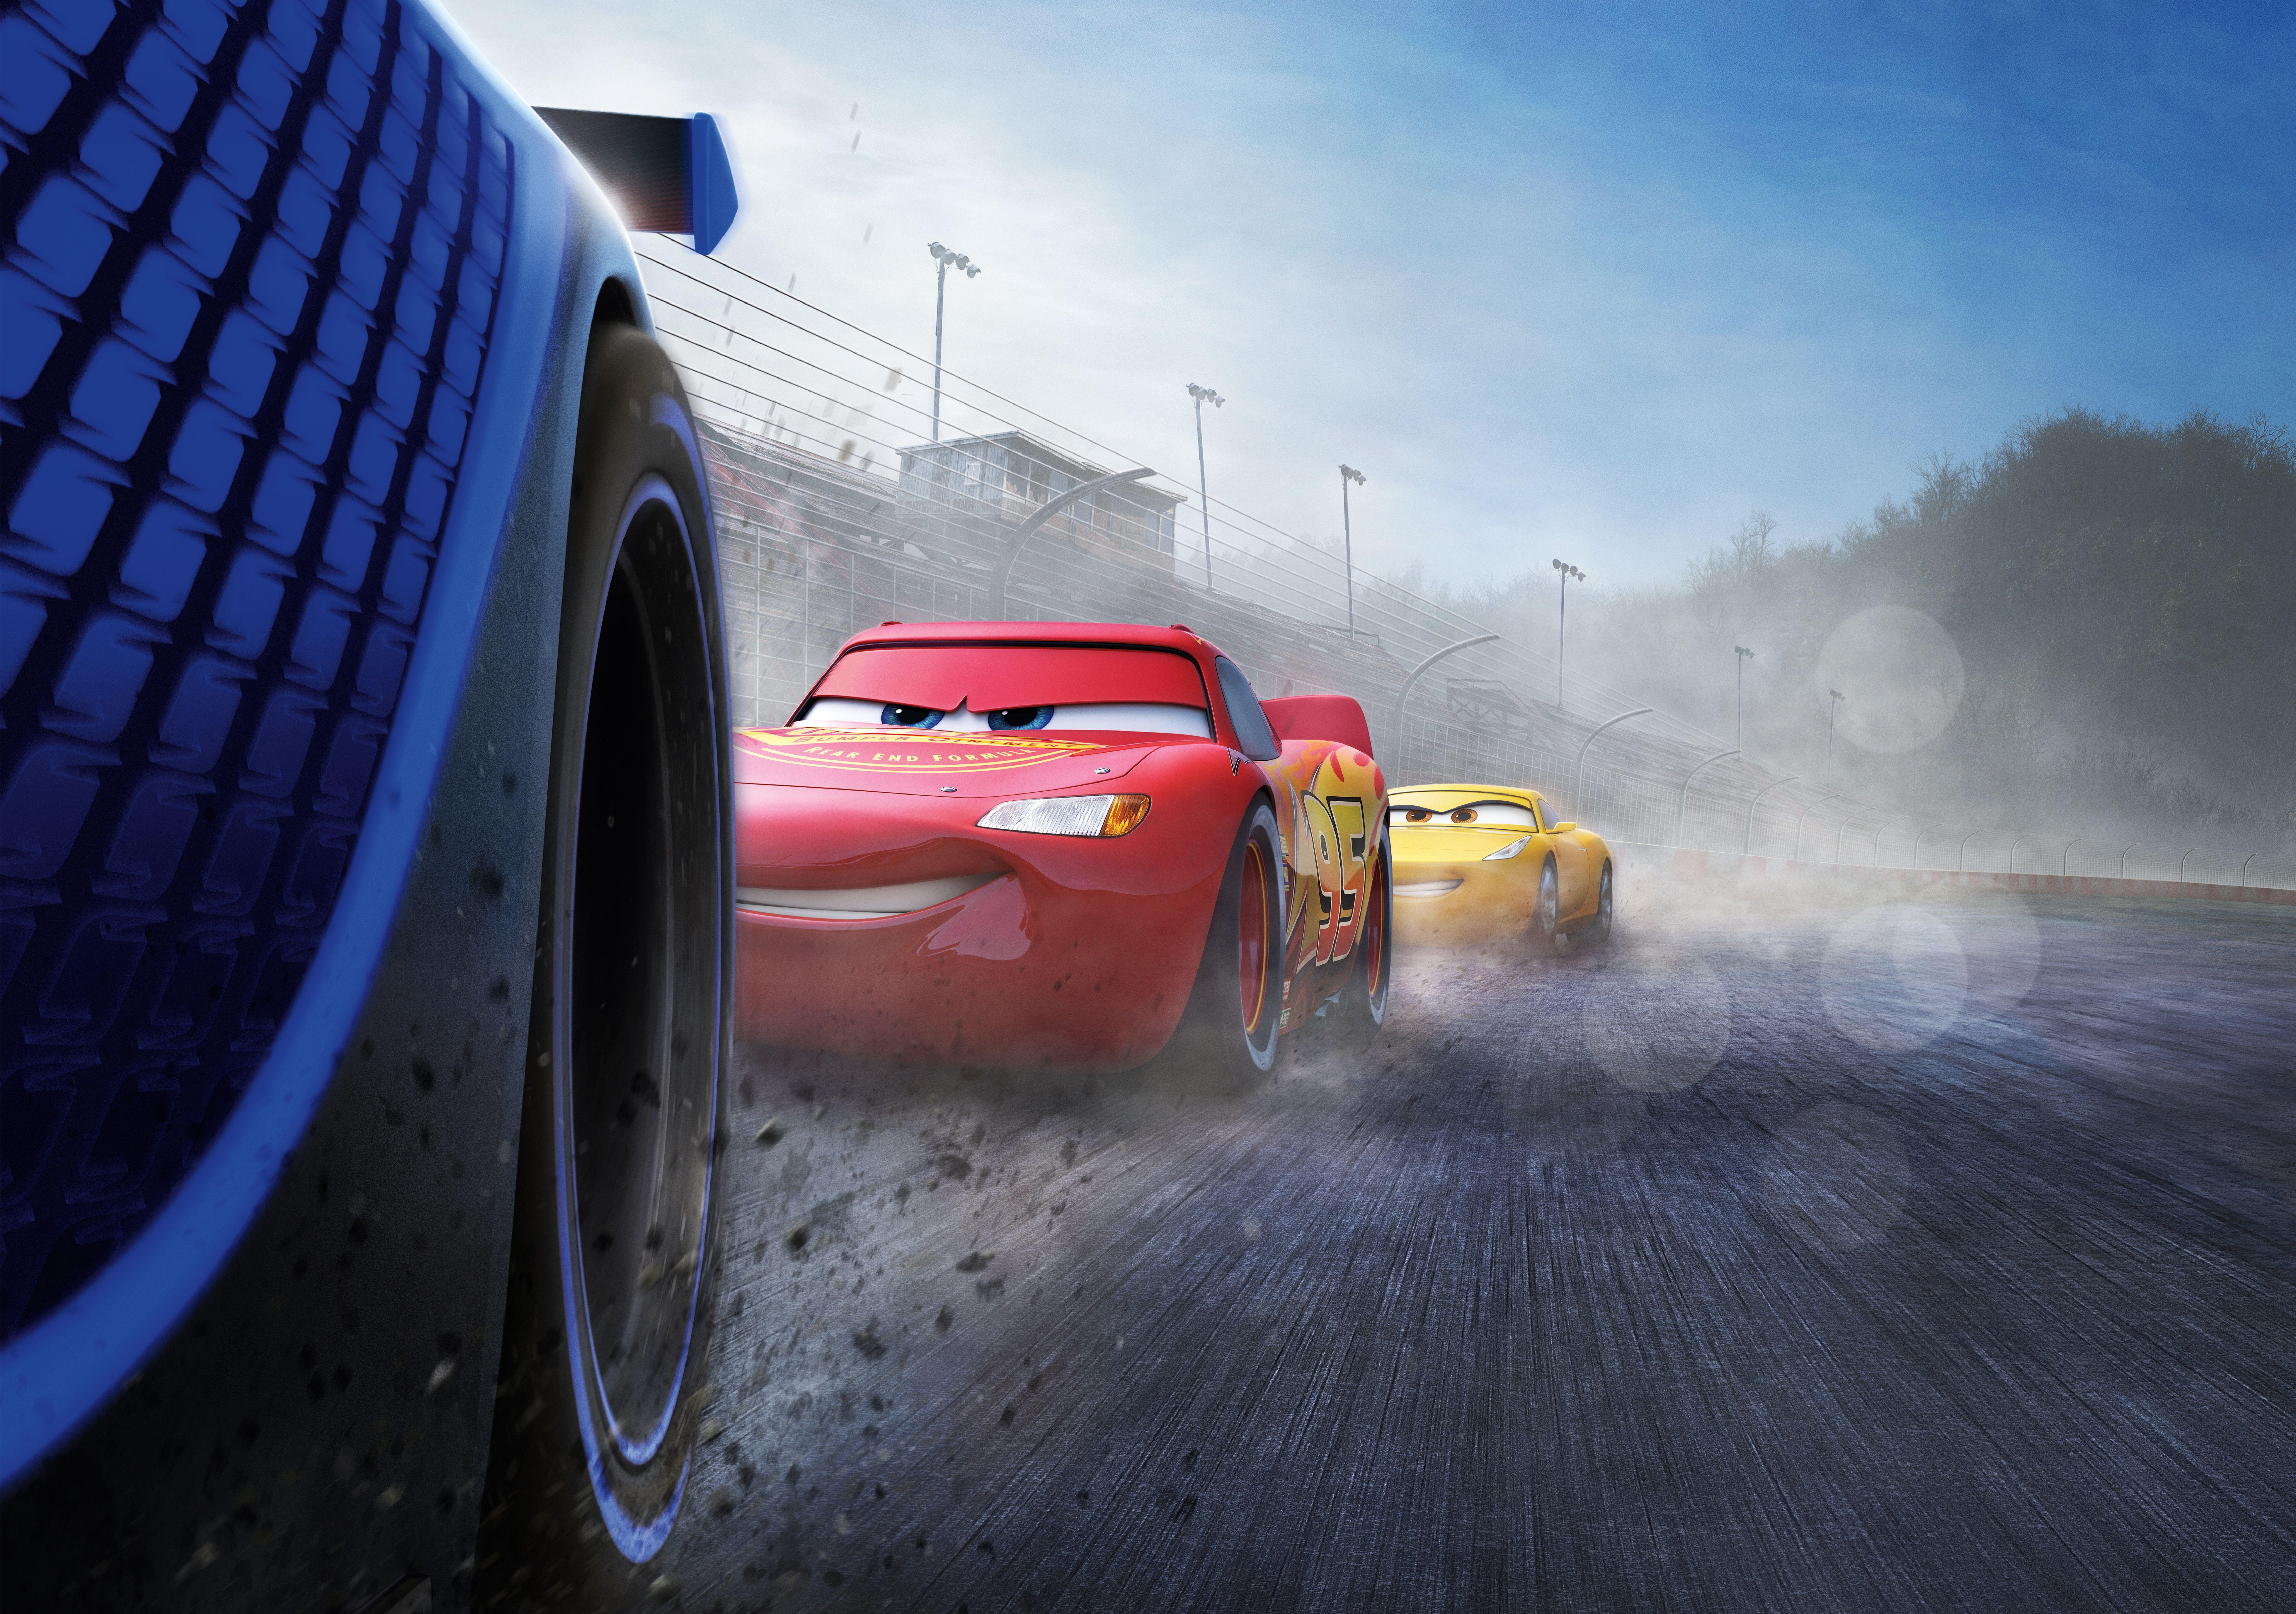 Lightning McQueen HD Wallpaper and Background Image